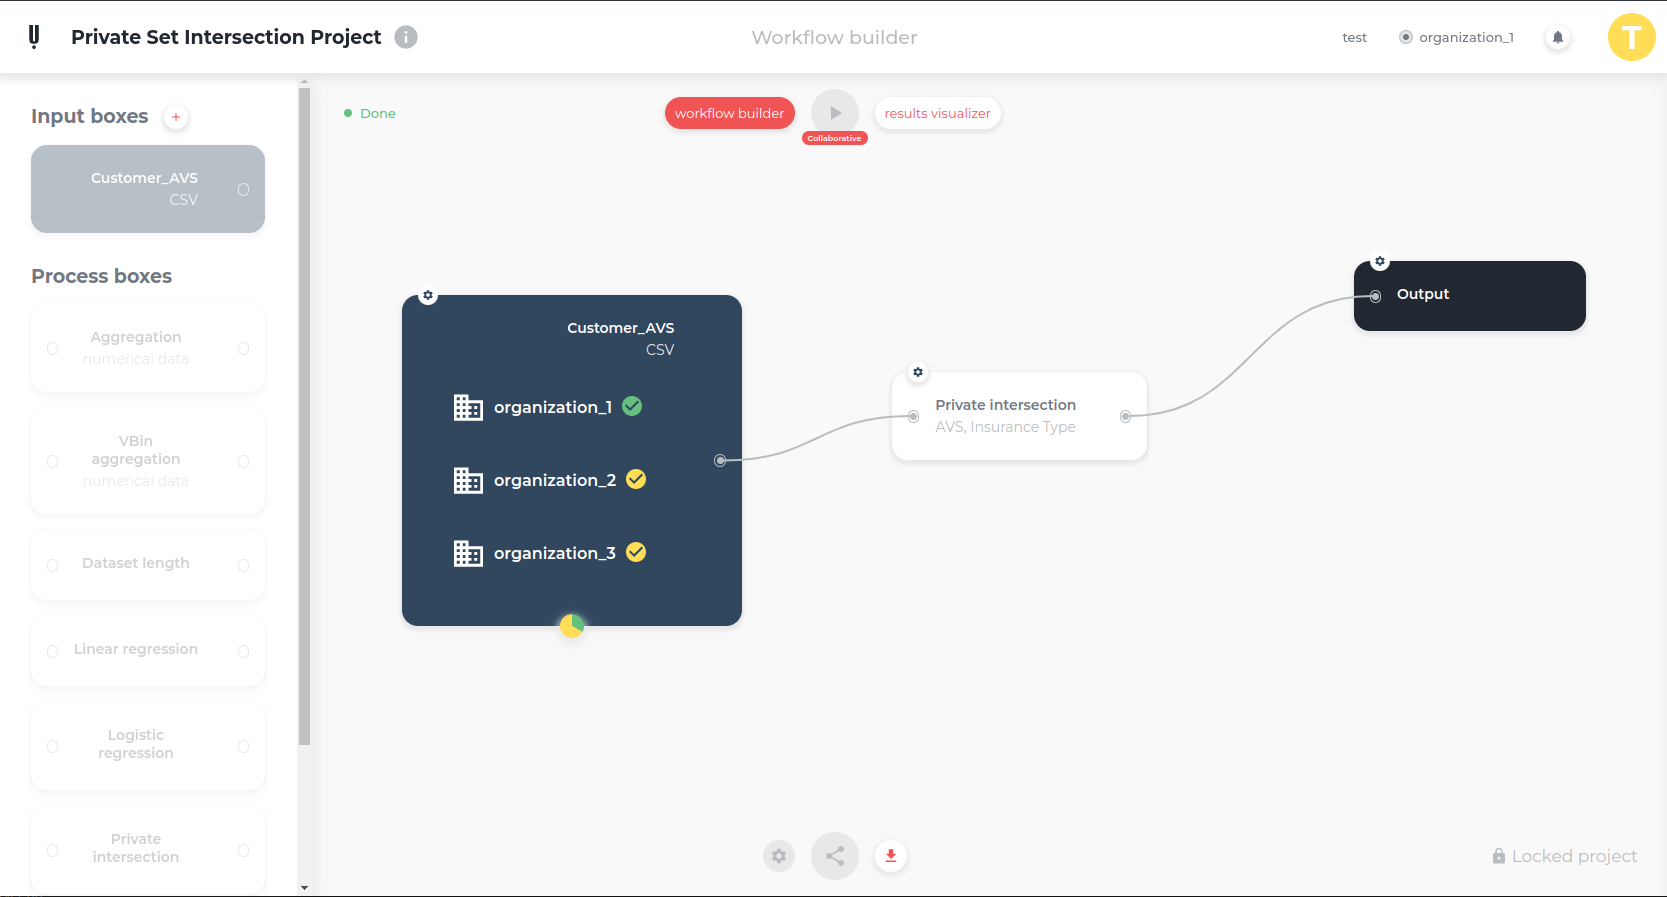 Tune Insight offers a workflow builder for private set intersection